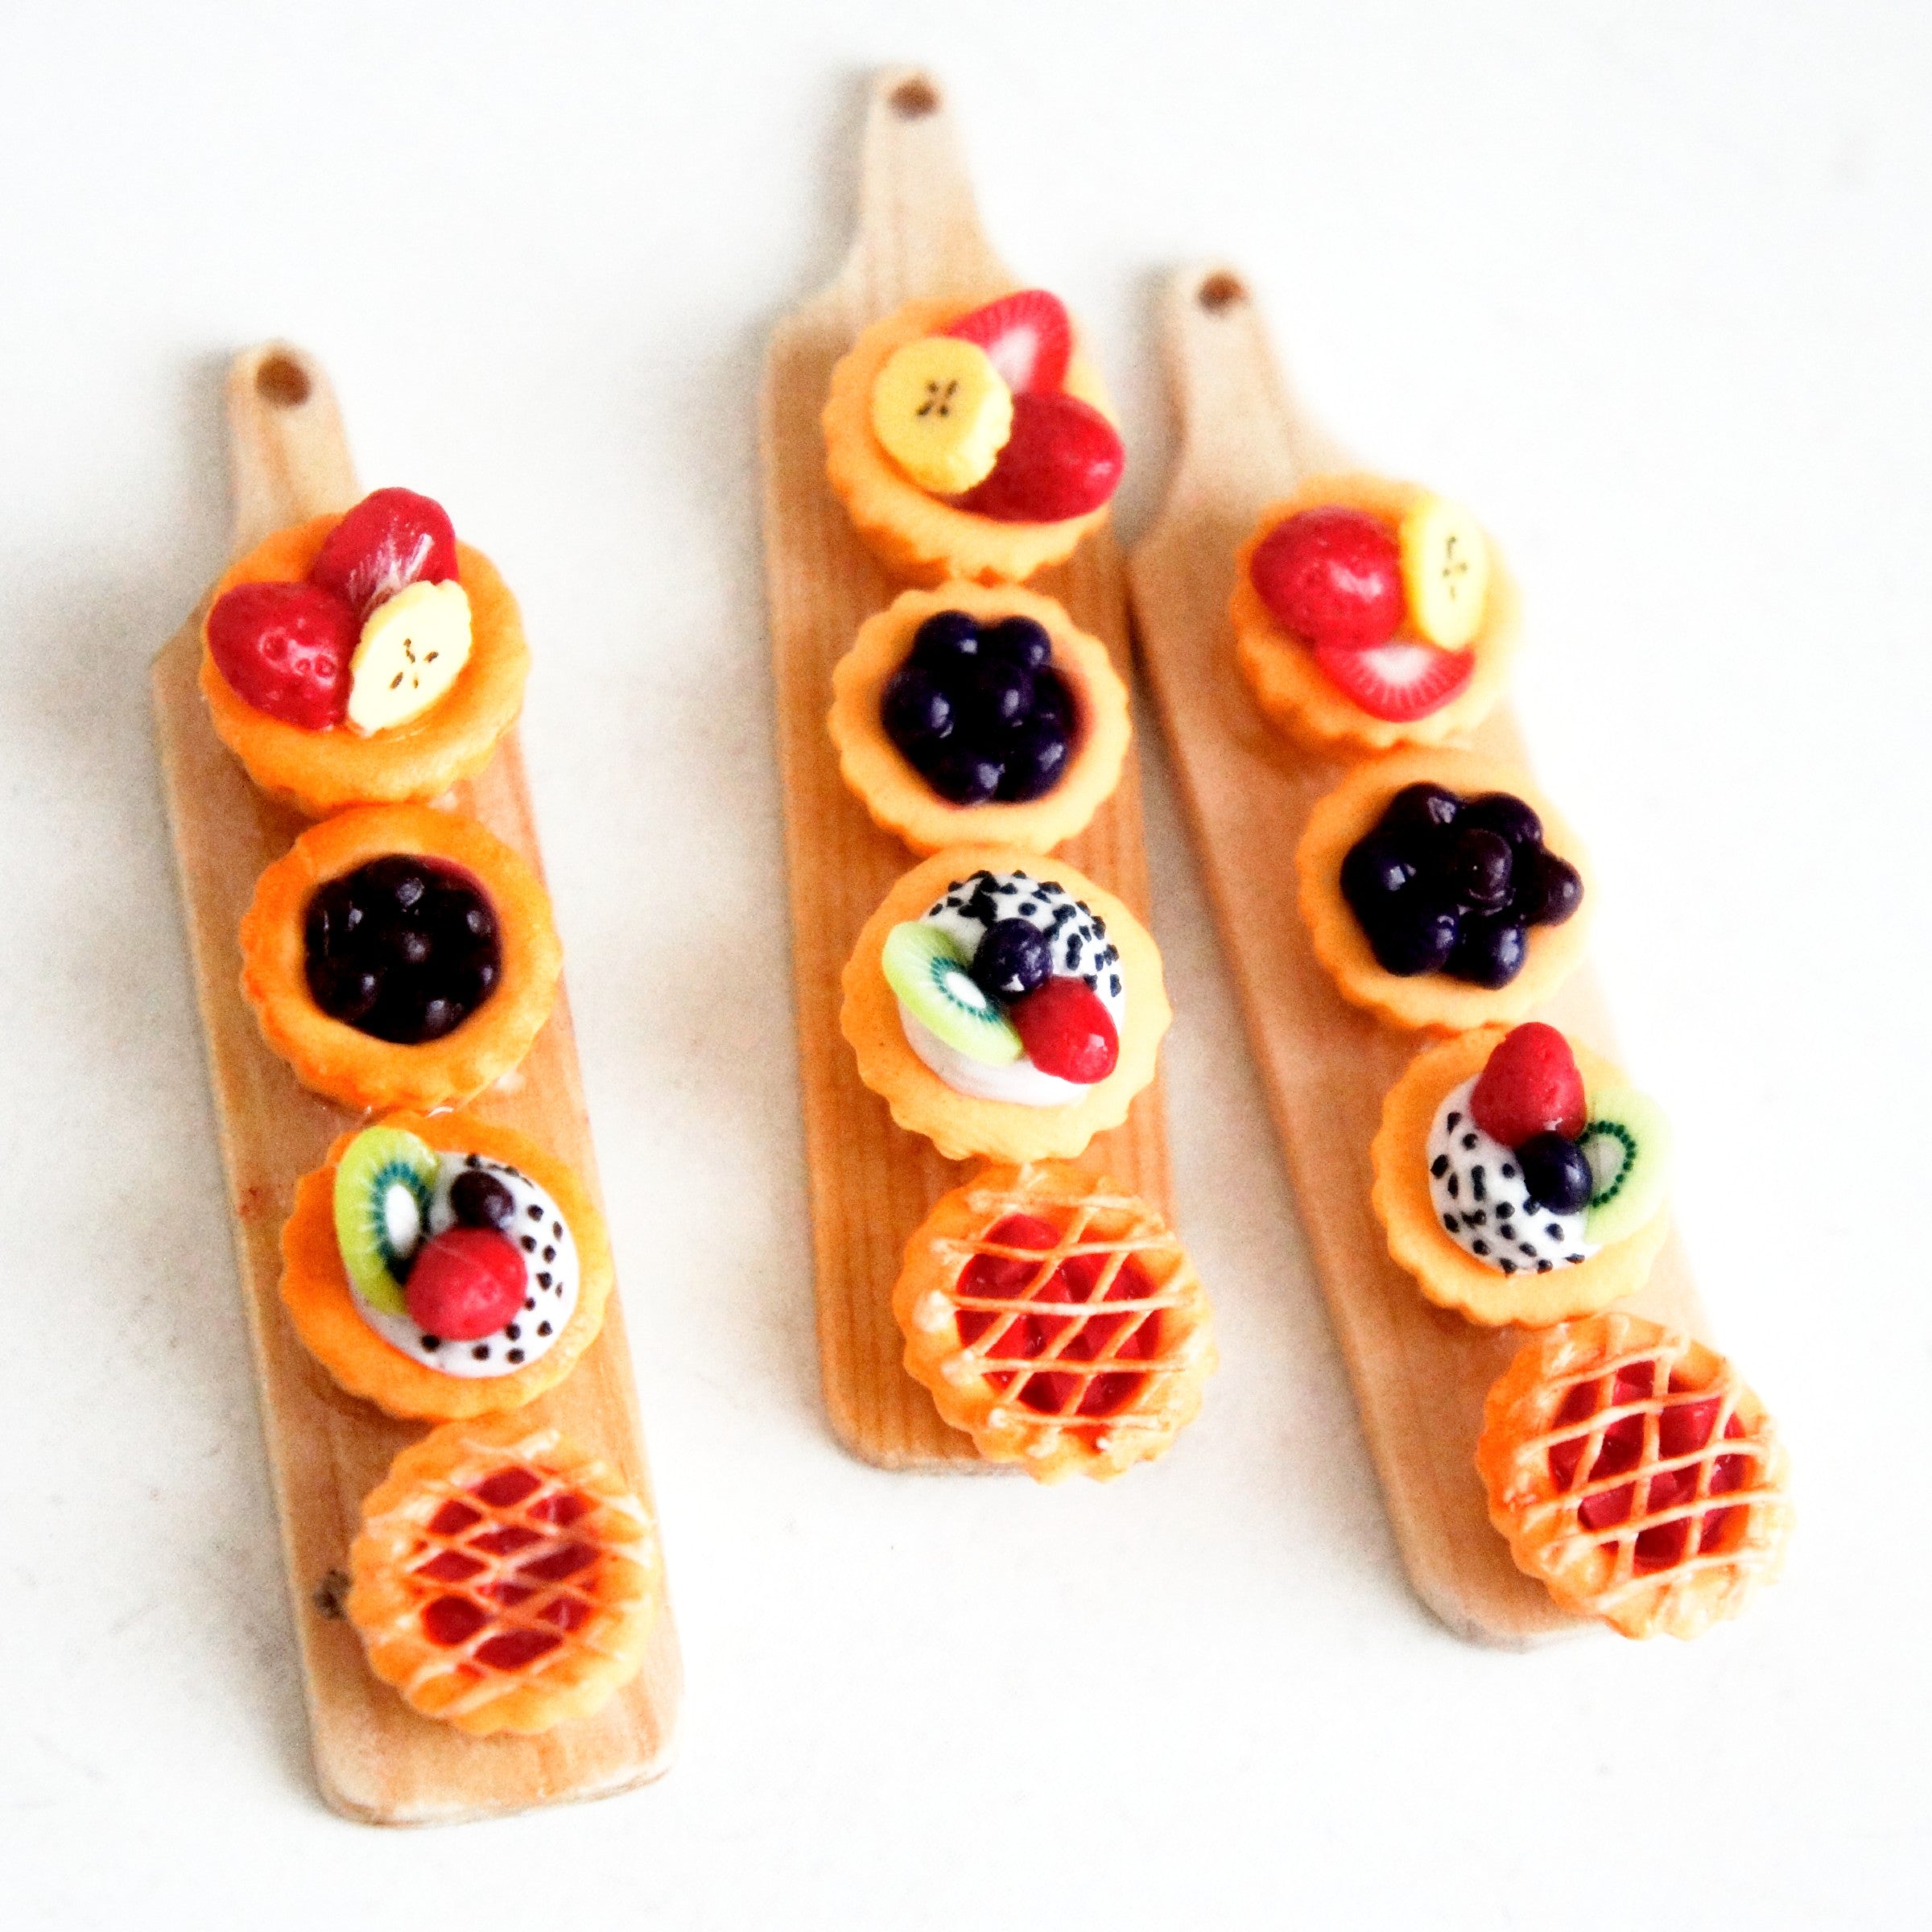 Fruit Pie Sampler Necklace - Jillicious charms and accessories